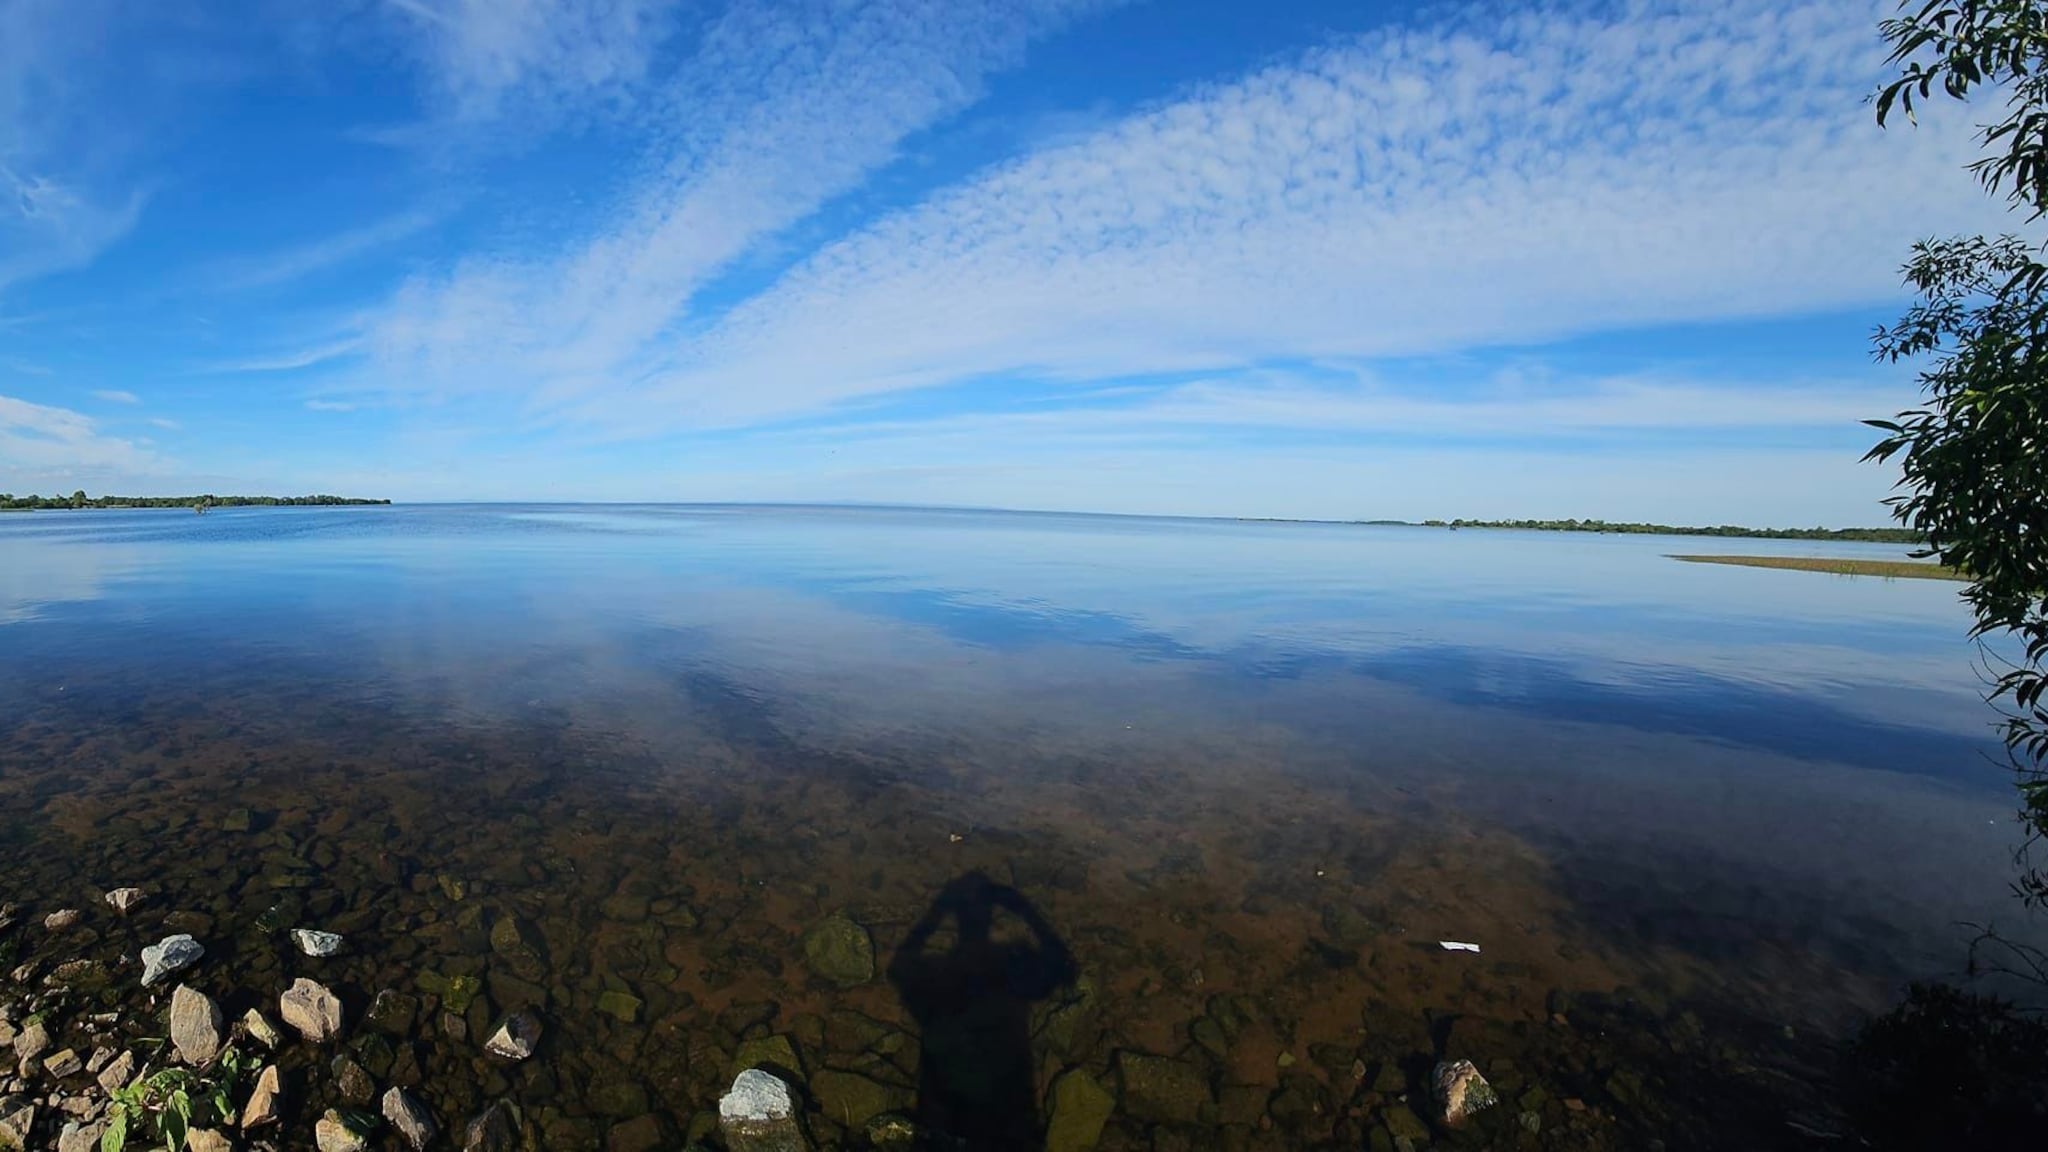 Lough Neagh this week 
PICTURE: COURTESY OF MALACHY QUINN